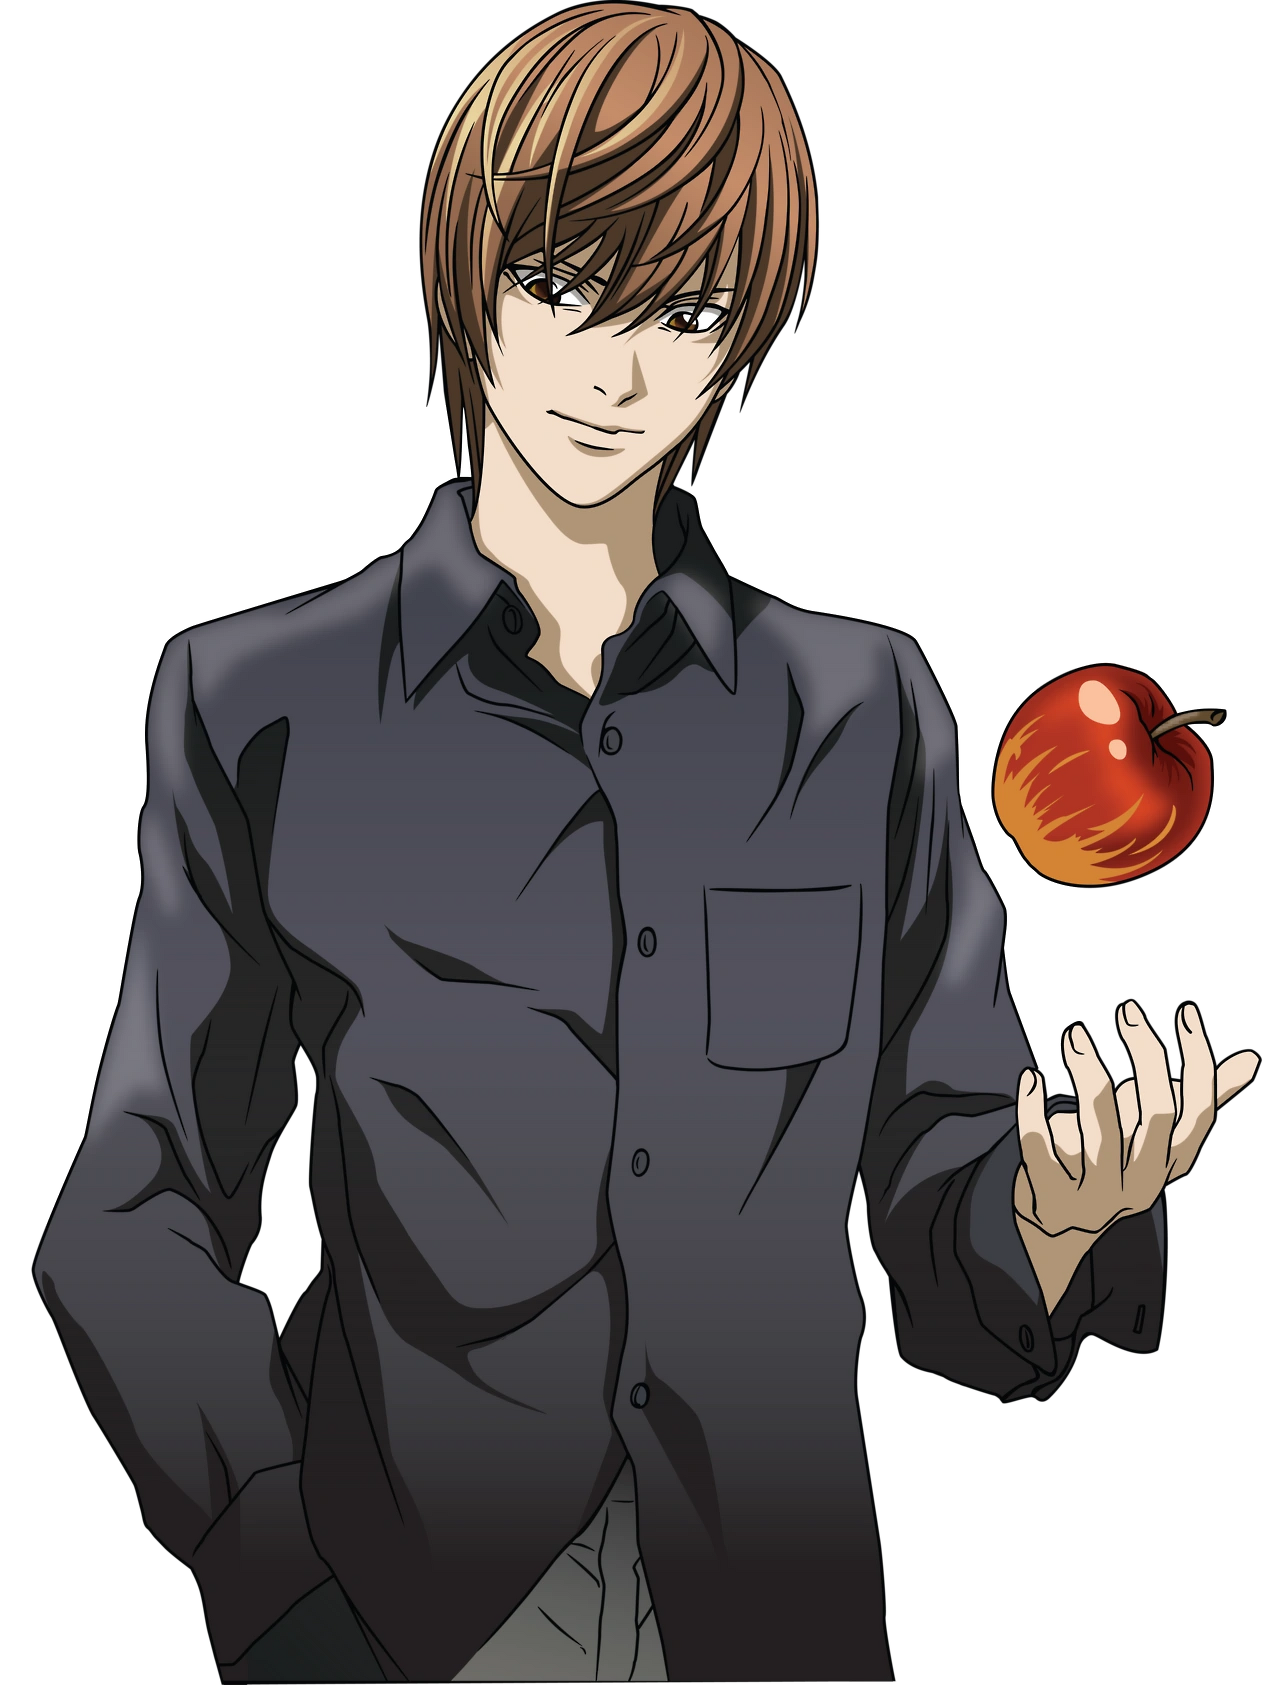 Death Note: Light Yagami's 5 Greatest Victories (& 5 Bitter Defeats)